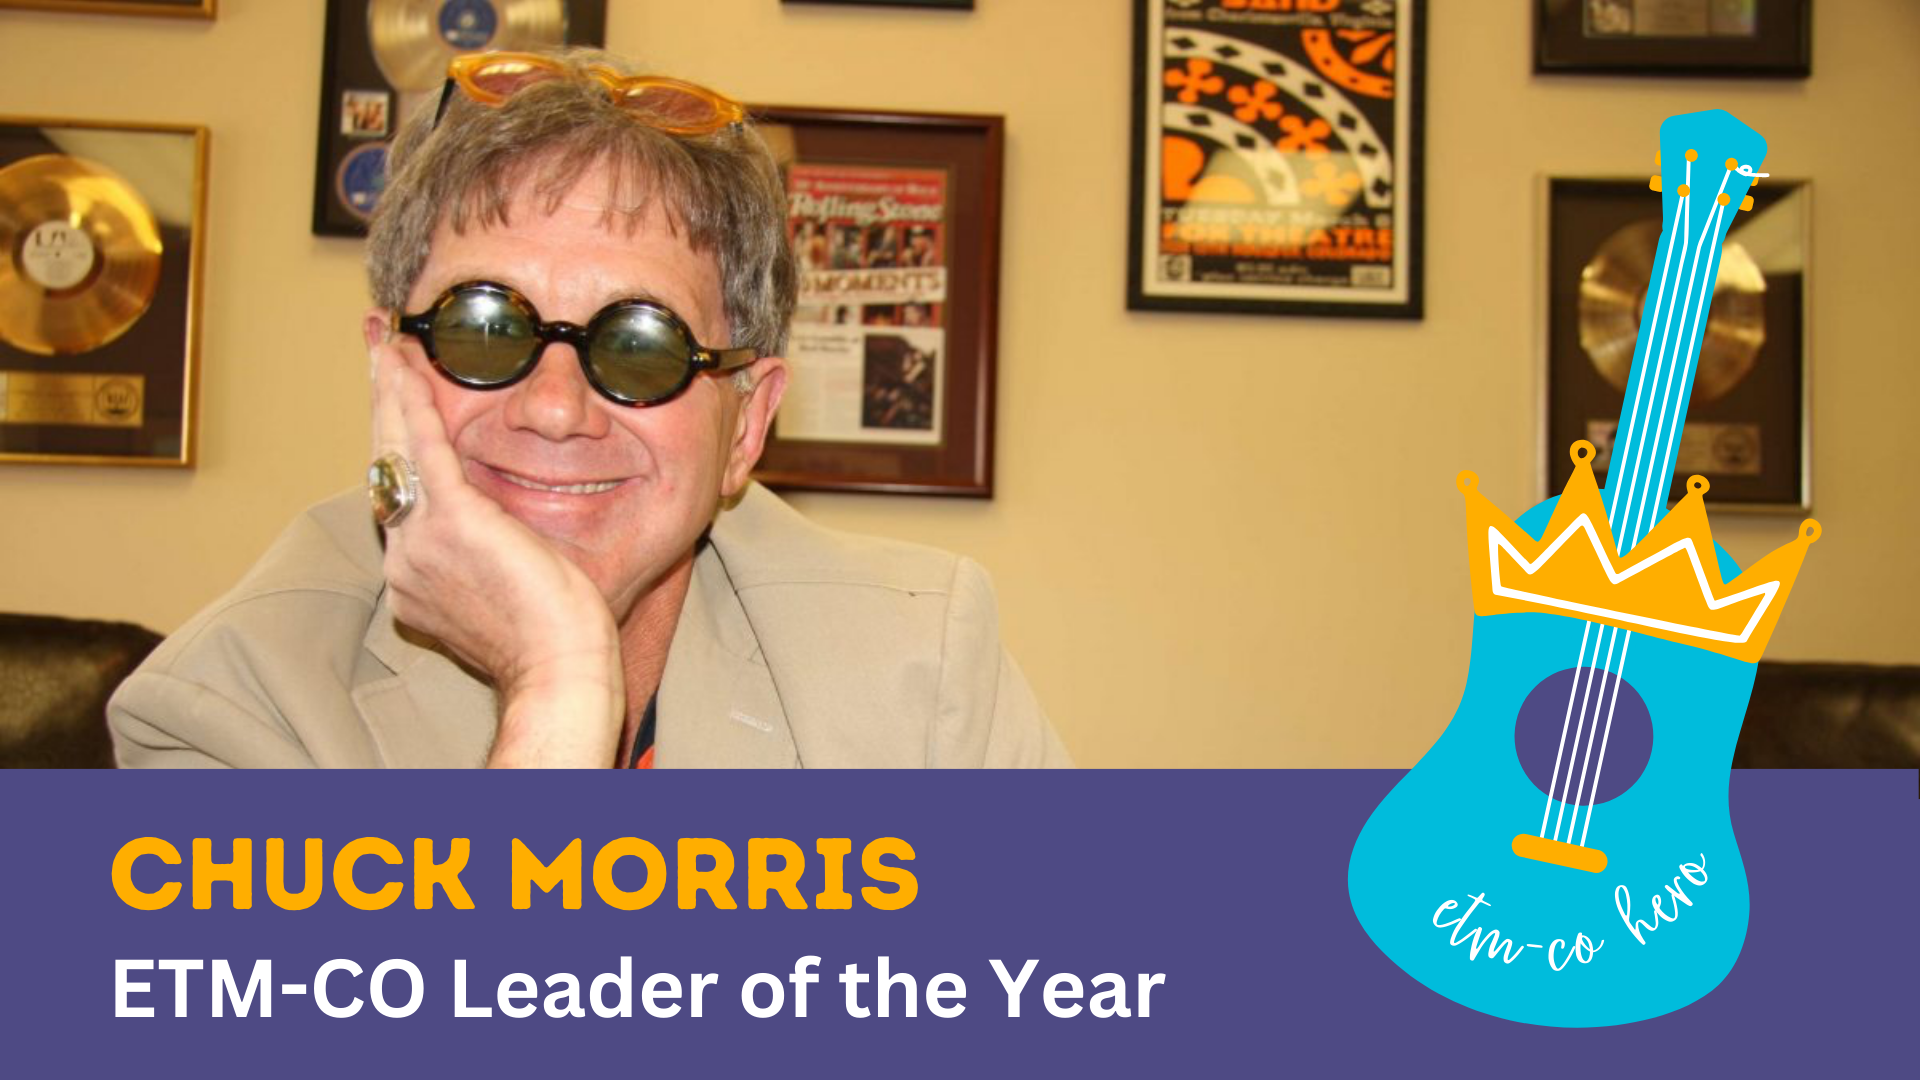 CHUCK MORRIS LEARDER OF THE YEAR